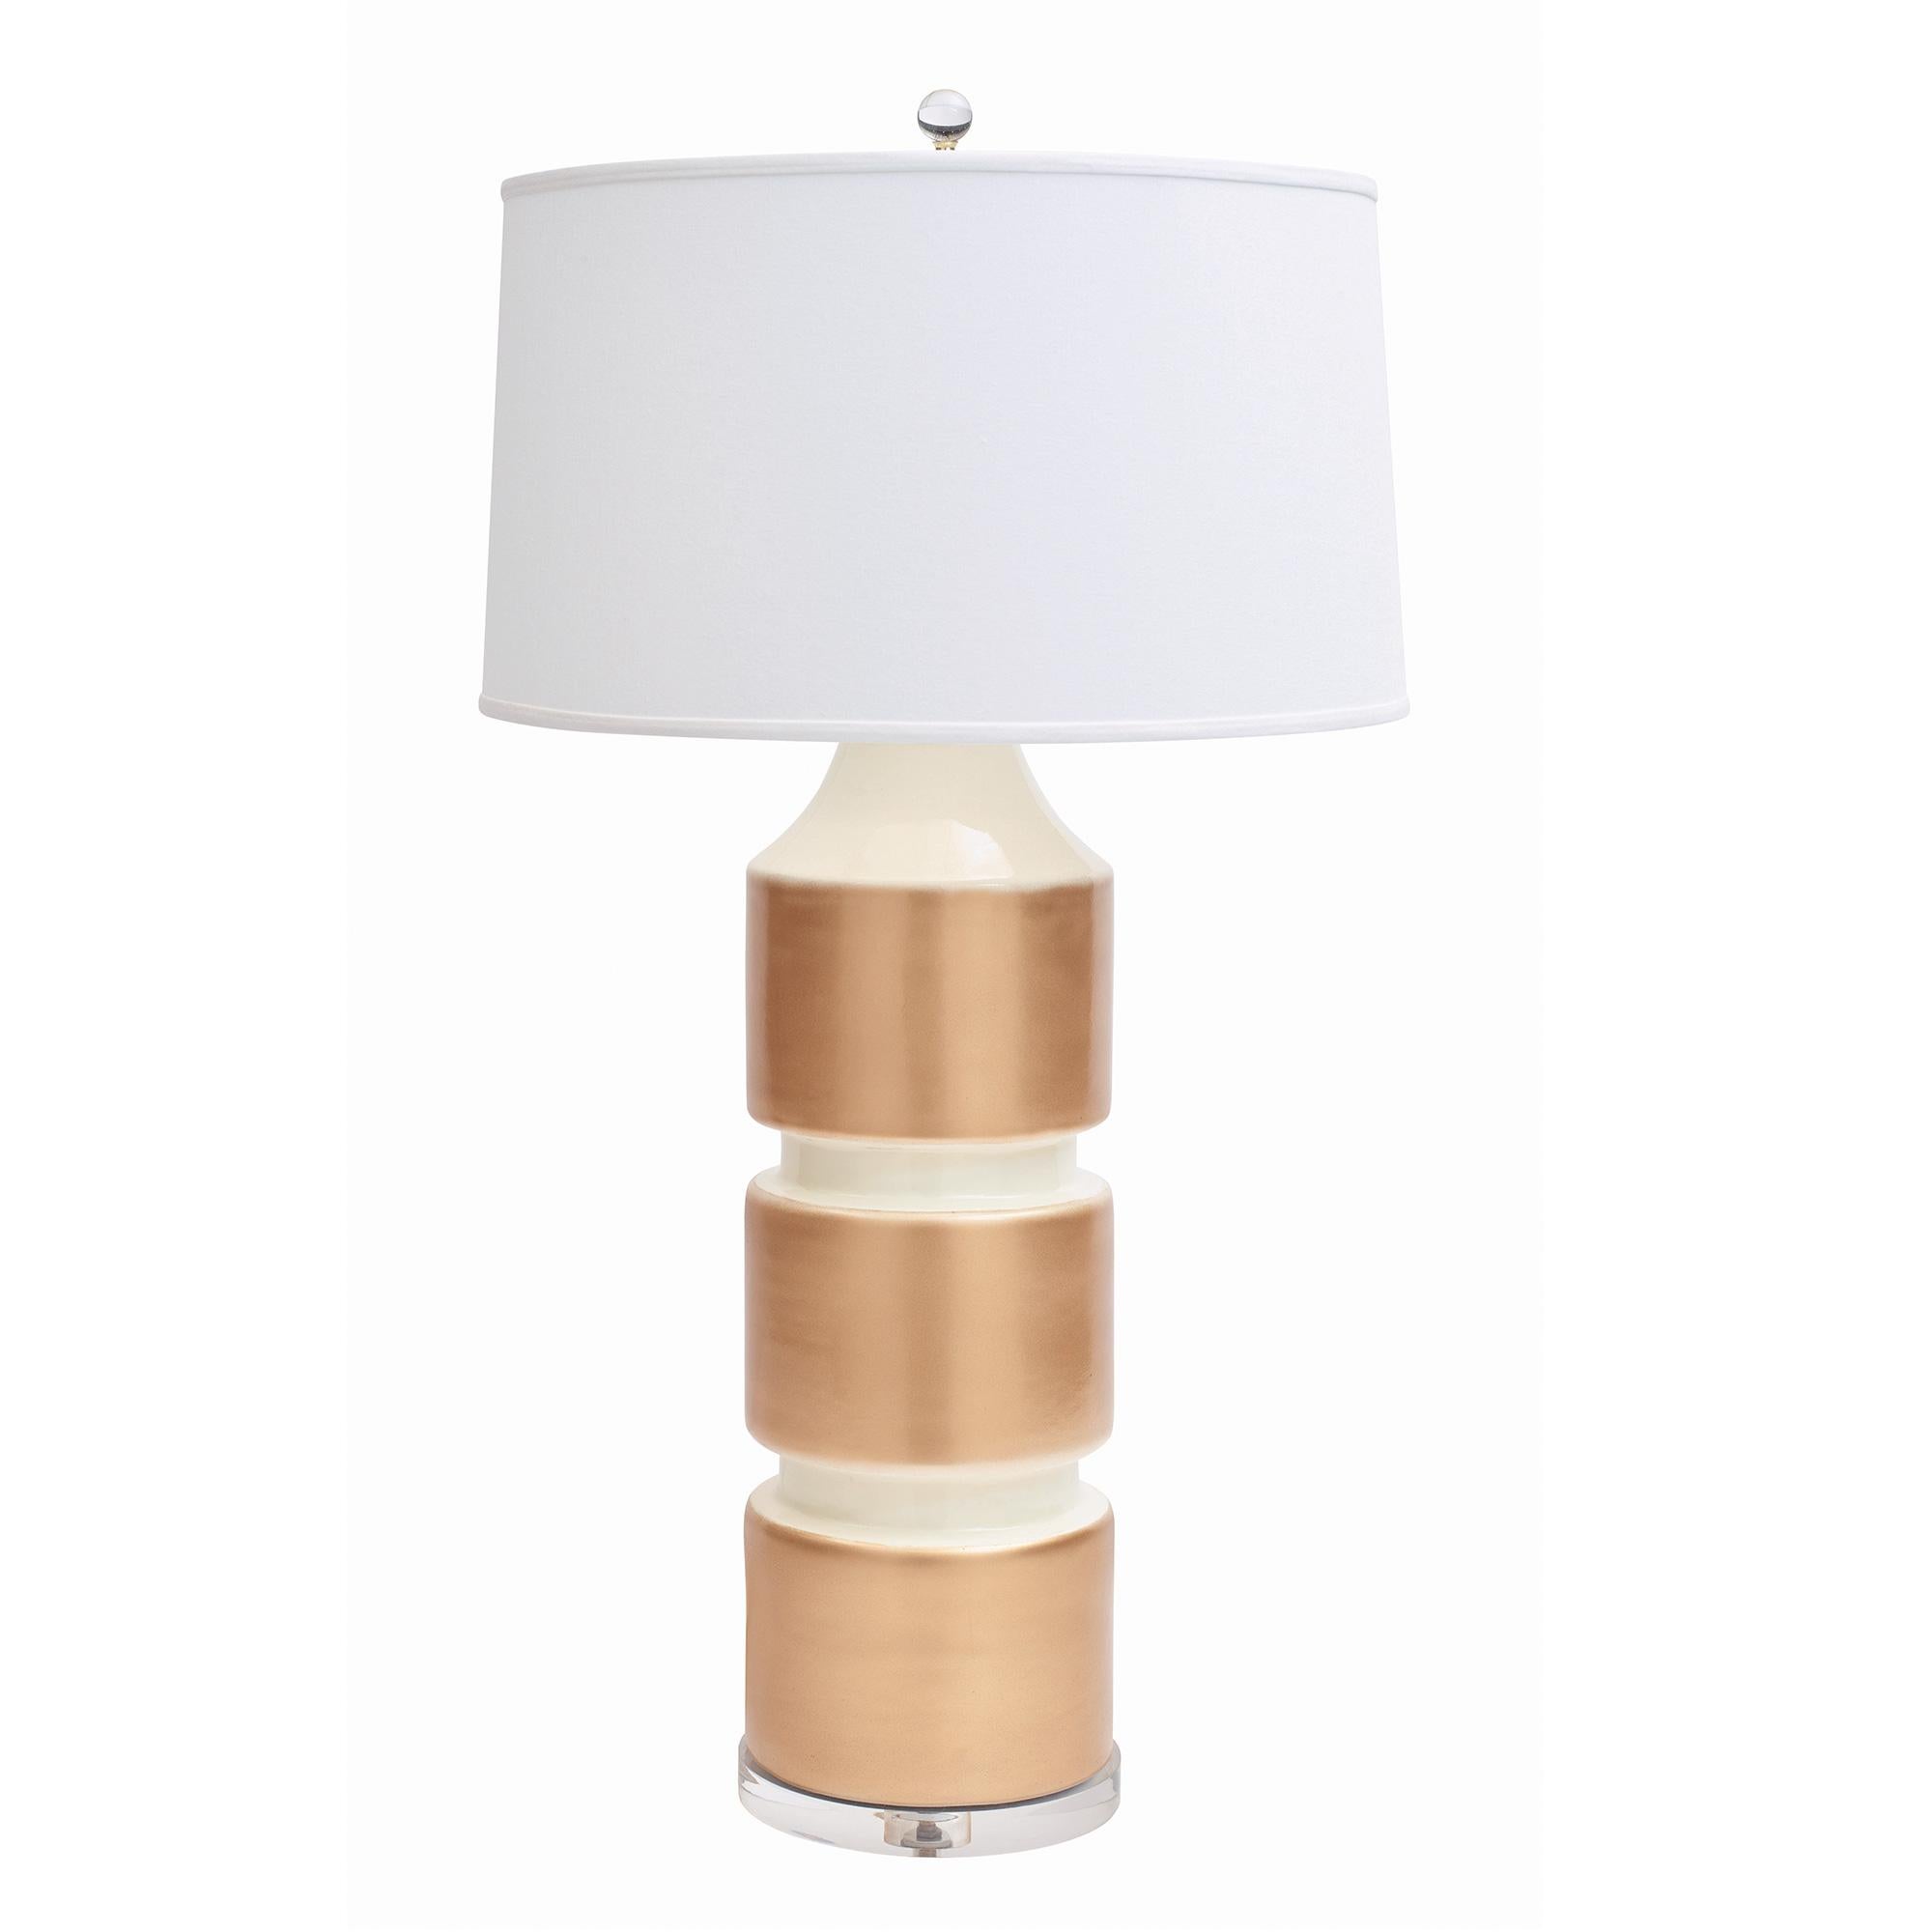 Gold (QR-20859.IVRYGOLD.0) Jan Showers Milan Ceramic Table Lamp with Ivory Linen Shade for Curatedkravet